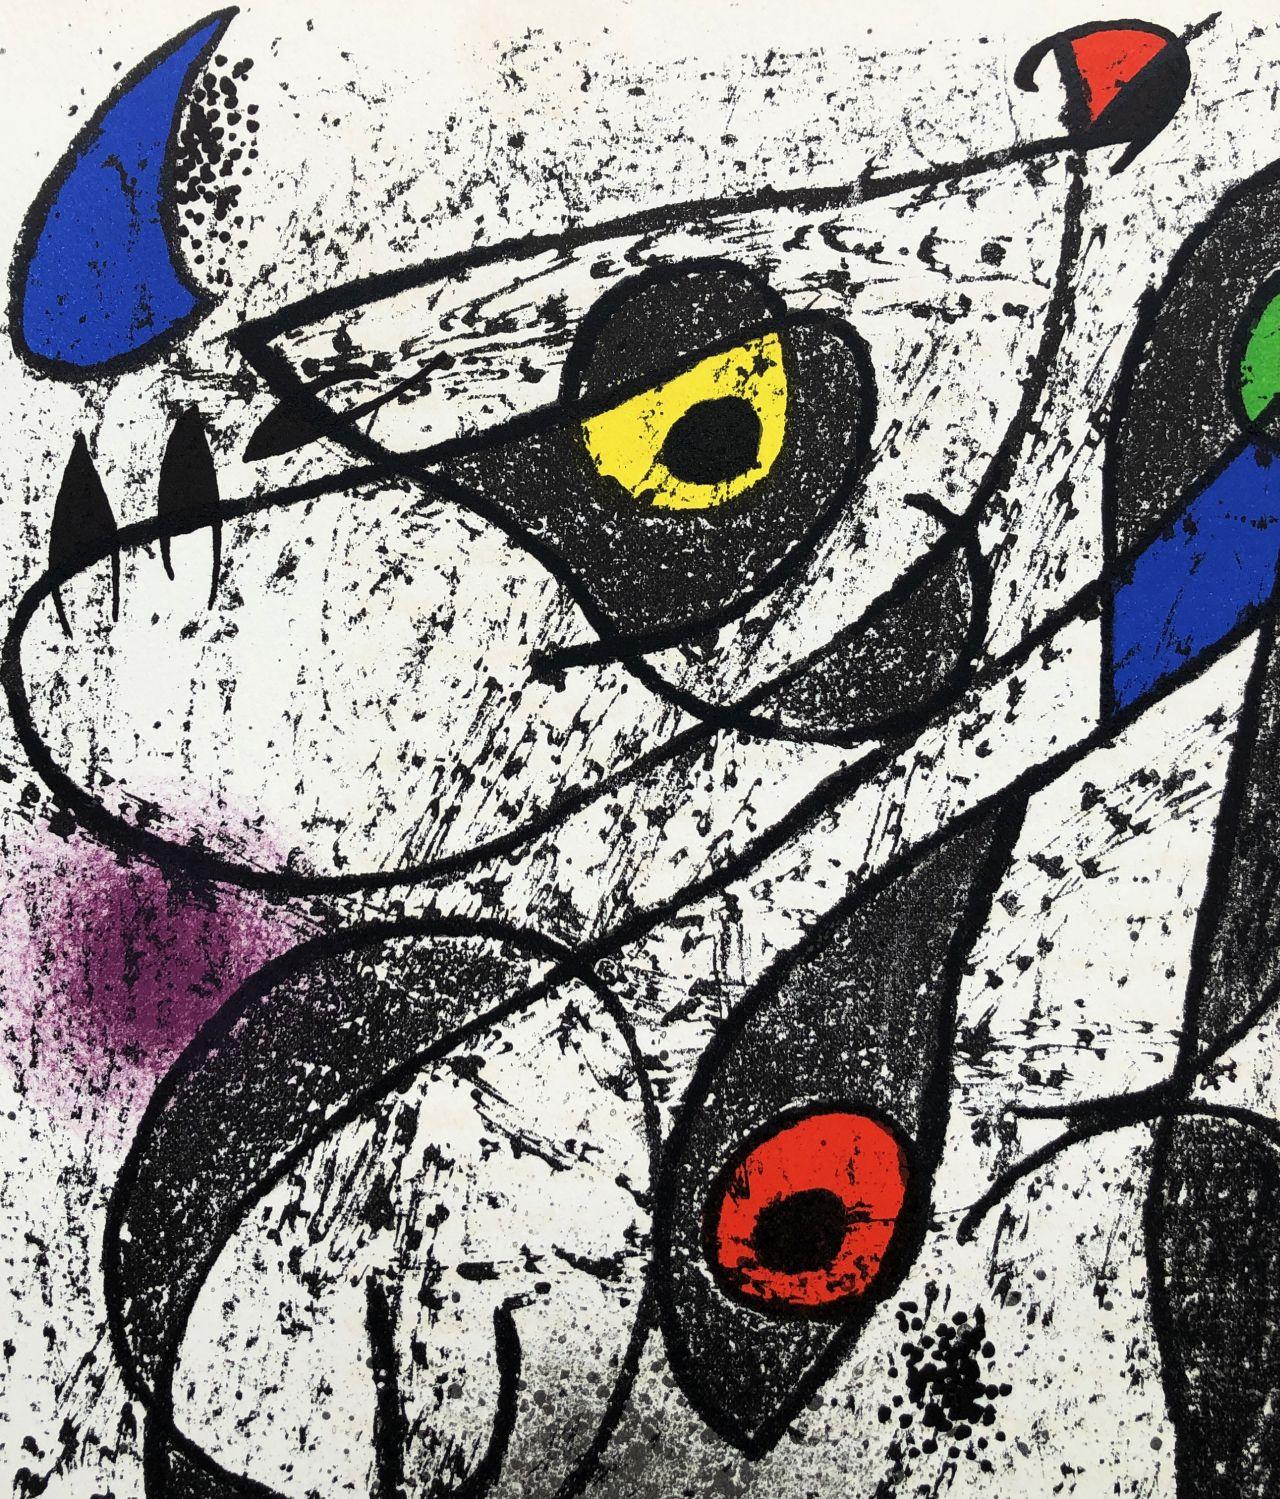 Joan Miro
Composition, 1972

Original lithograph (printed in Arte/Maeght workshop)
On wove paper, size 35 x 25 cm (c. 13,7 x 9,8 in)
Very good condition

REFERENCES : Catalog raisonné 